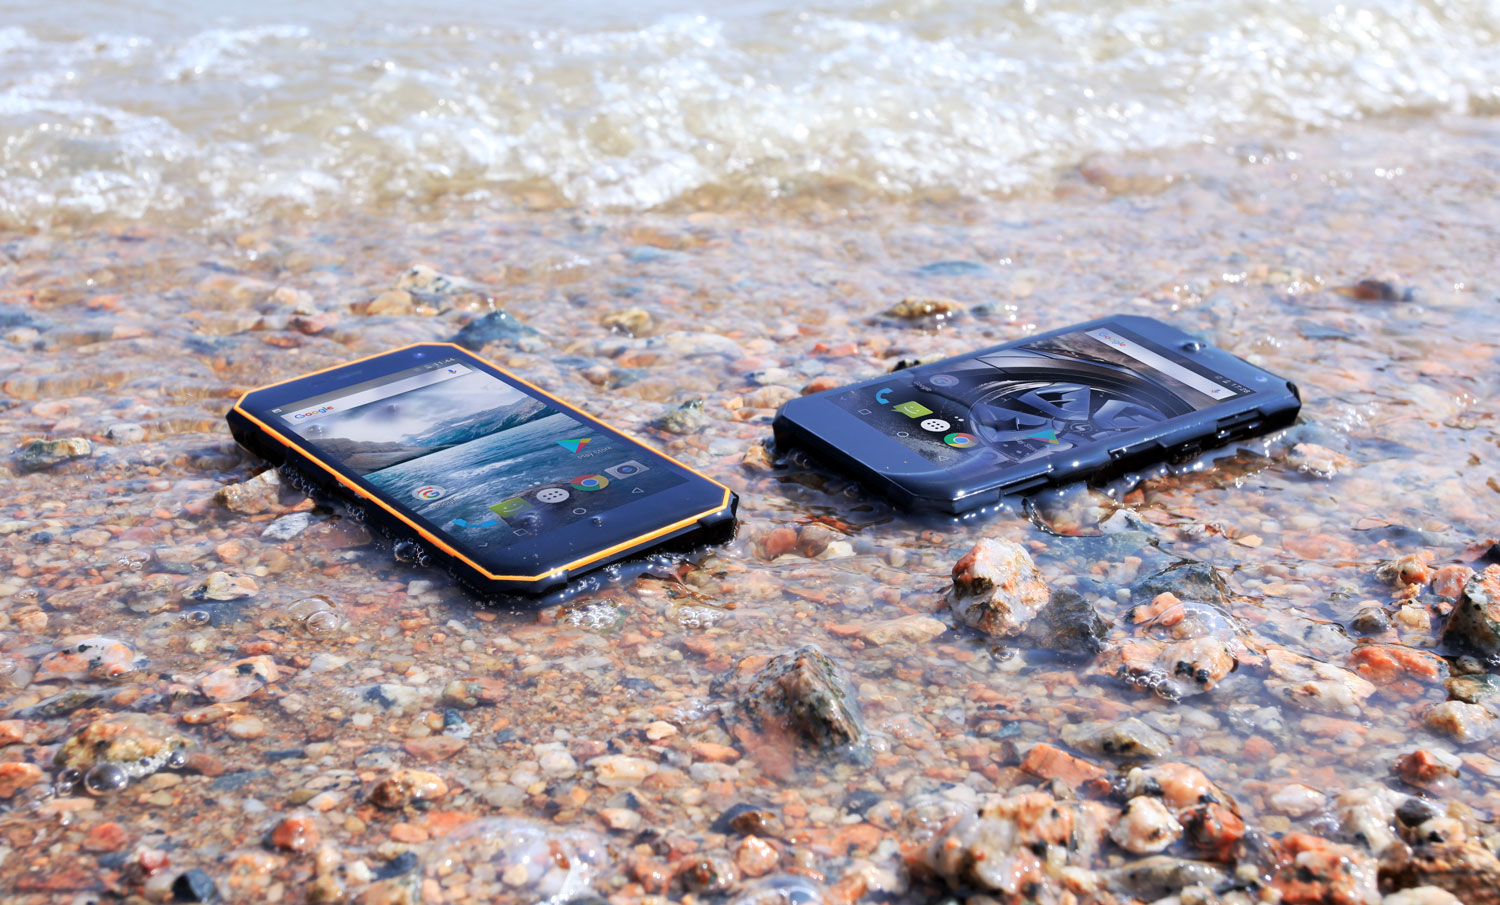 The Chinese have developed a smartphone-amphibian